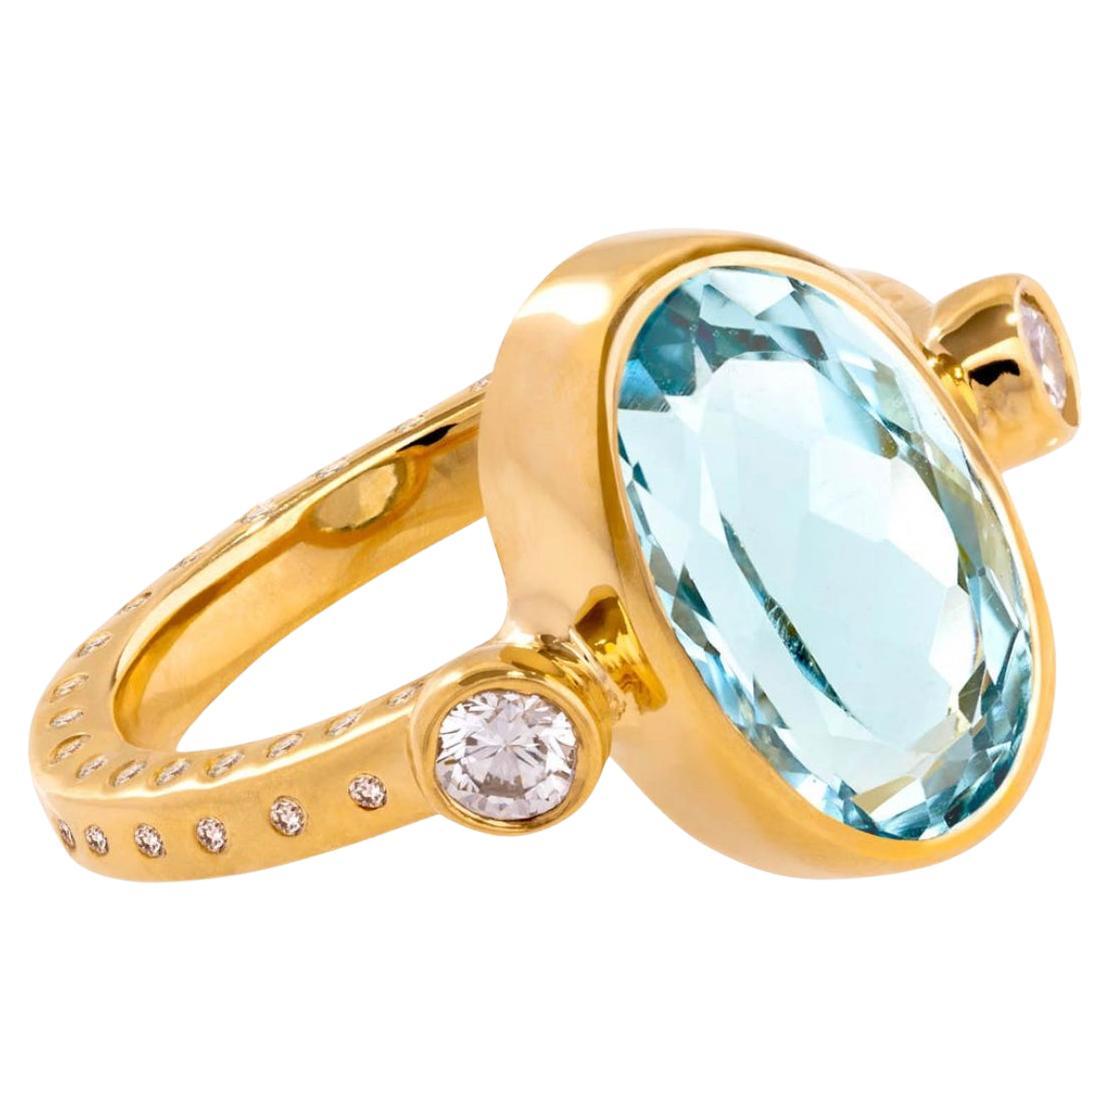 Paris & Lily, 22K Gold, Aquamarine and Diamond Ring For Sale